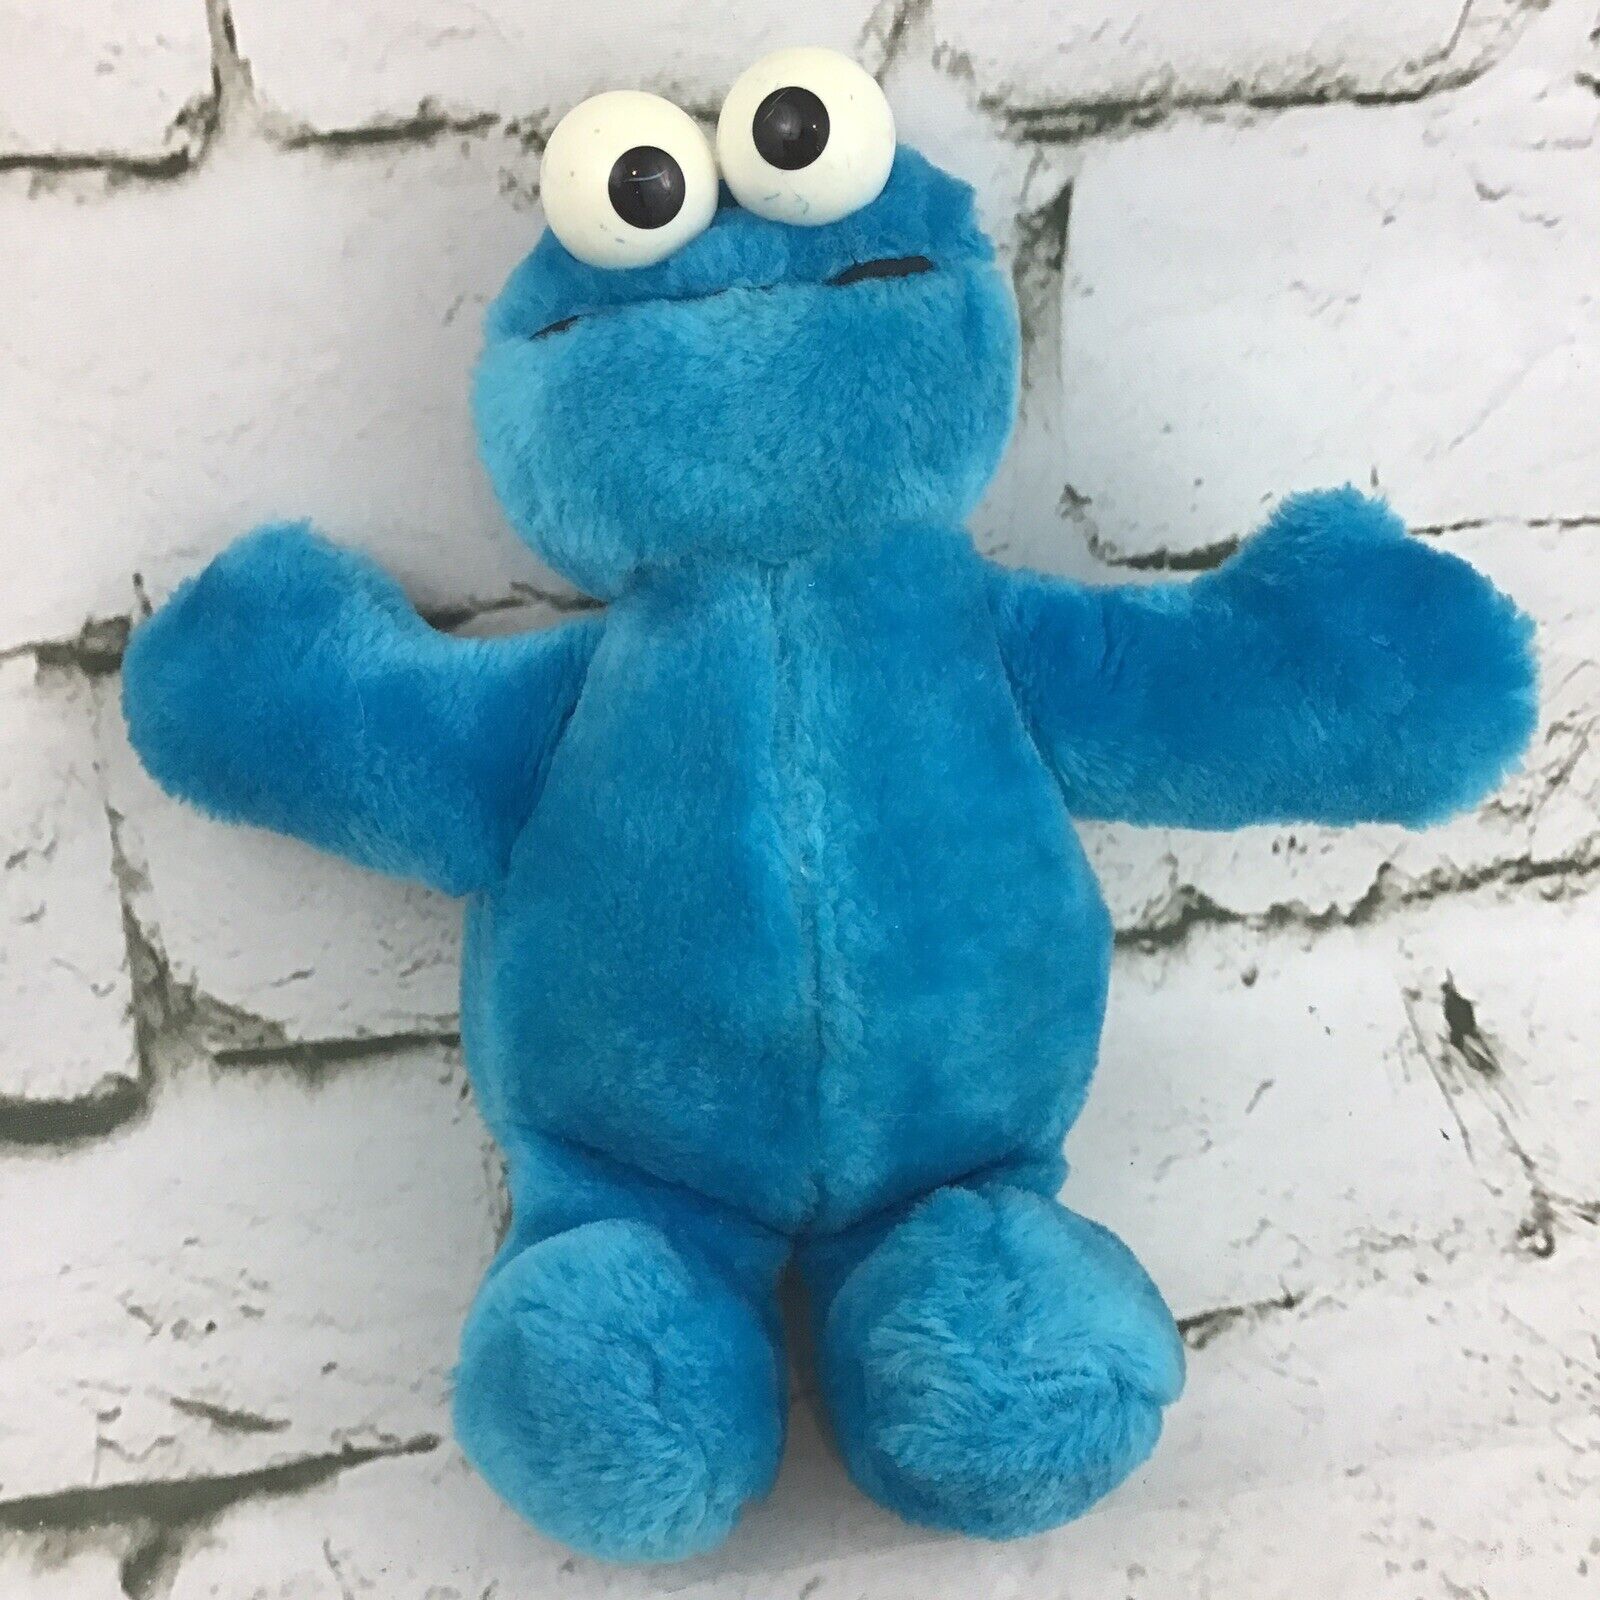 Vintage 90’s Sesame Street Cookie Monster Plush Doll Stuffed Animal By Tyco 1995